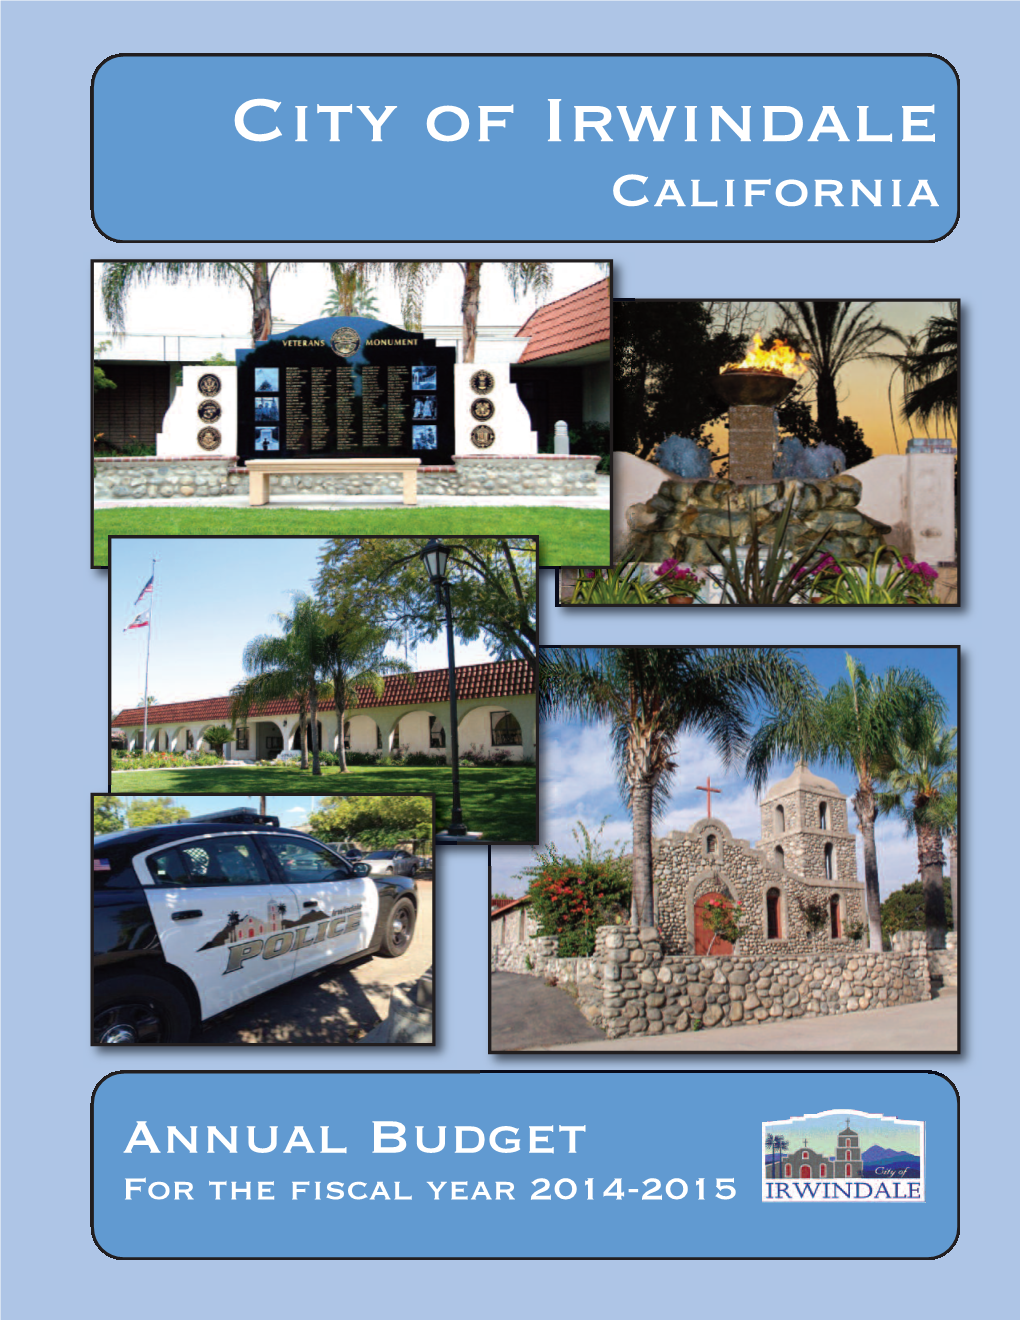 2014-2015 Annual Budget 2014/15